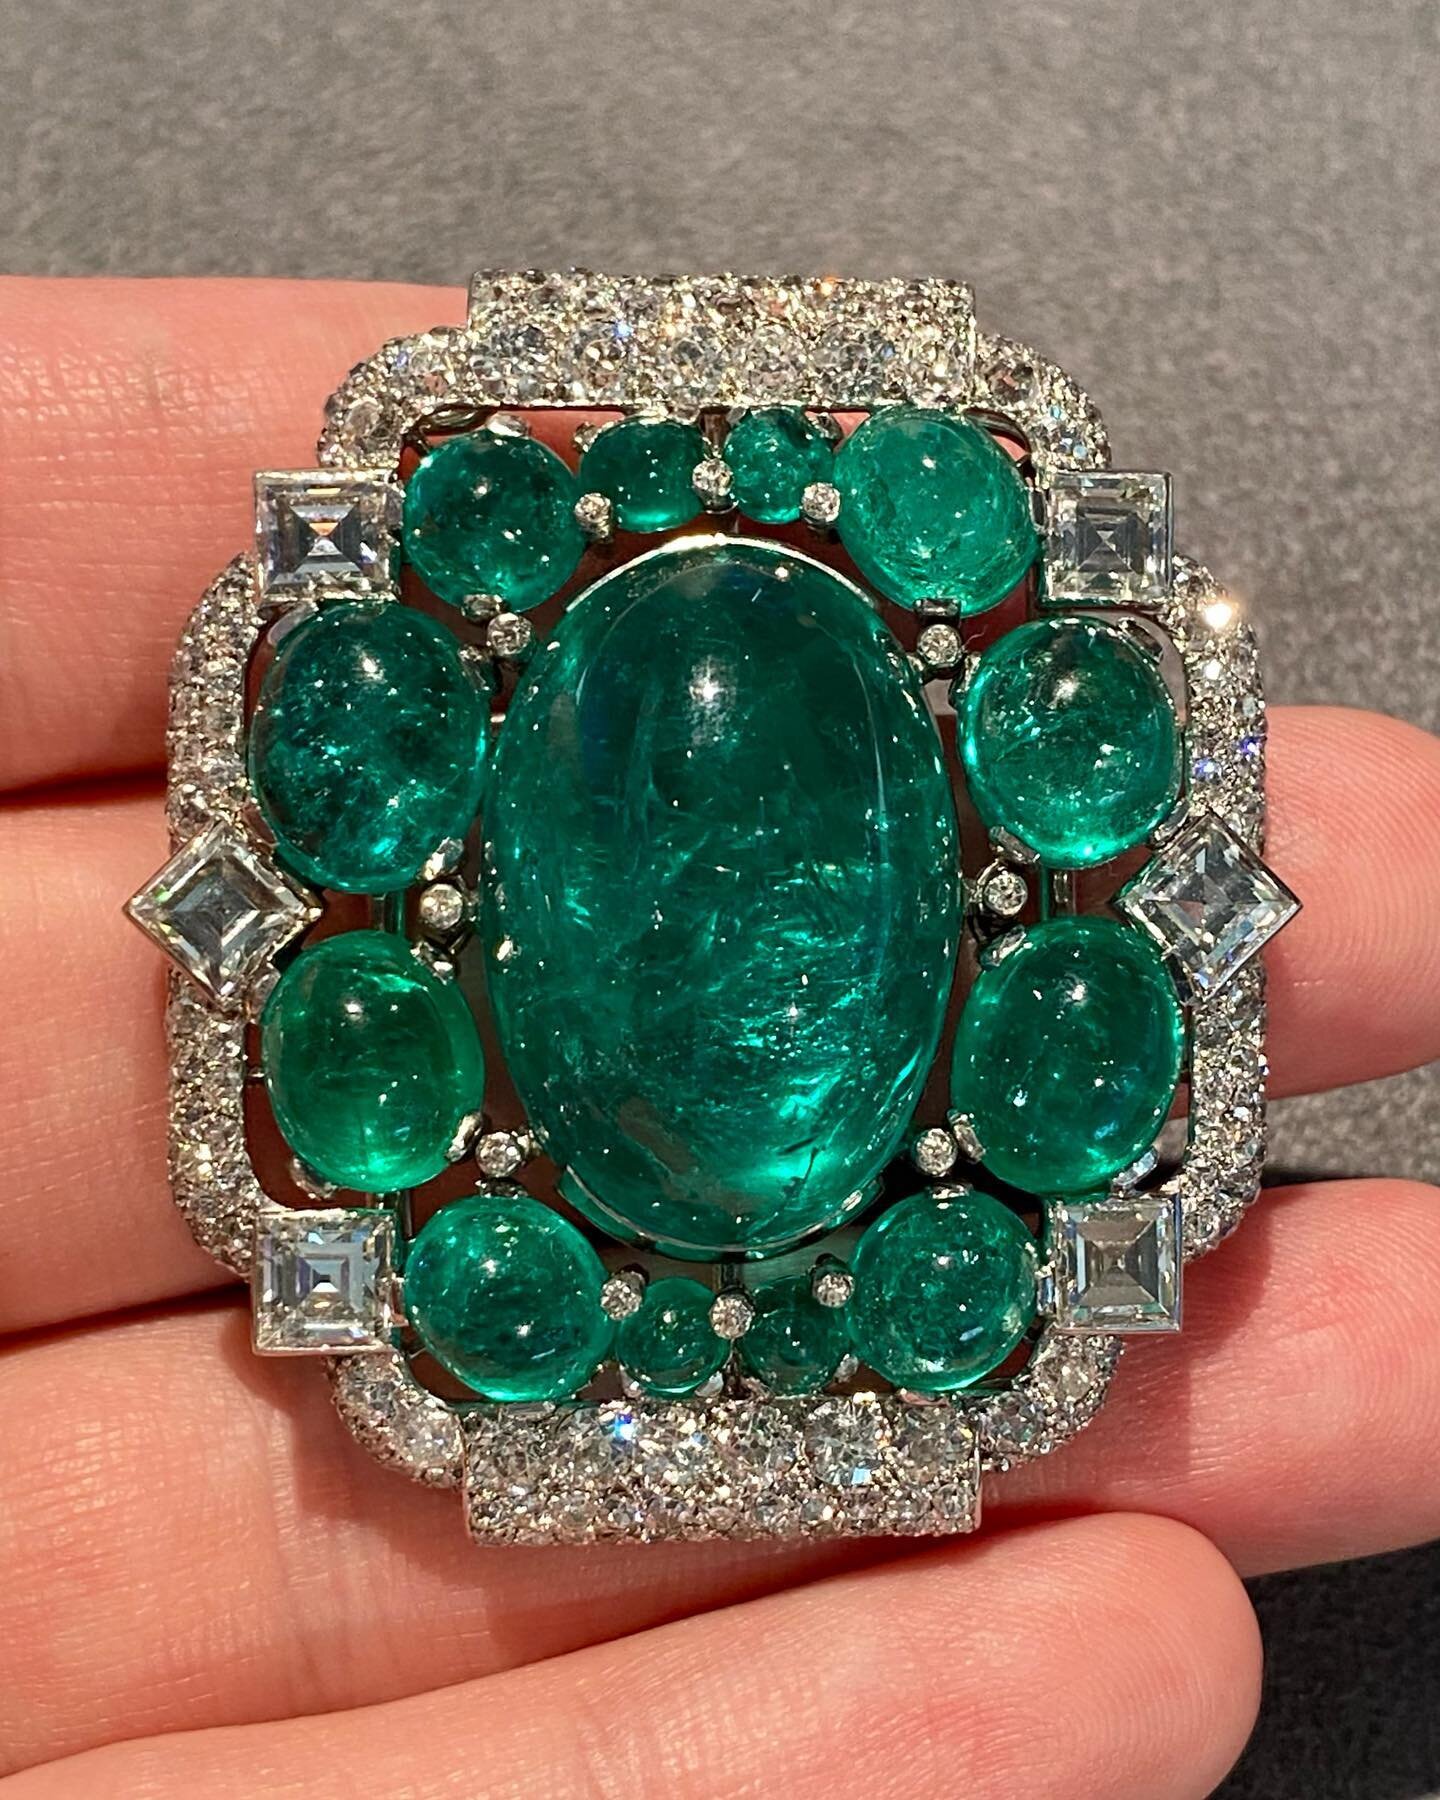 Something about this emerald brooch makes me think of the holidays&hellip; Maybe it&rsquo;s the lambent, verdant drops of the dreamiest 61.5 carats of Colombian and Russian emeralds. Maybe the 176 coruscant diamonds bring to mind the twinkling of lig